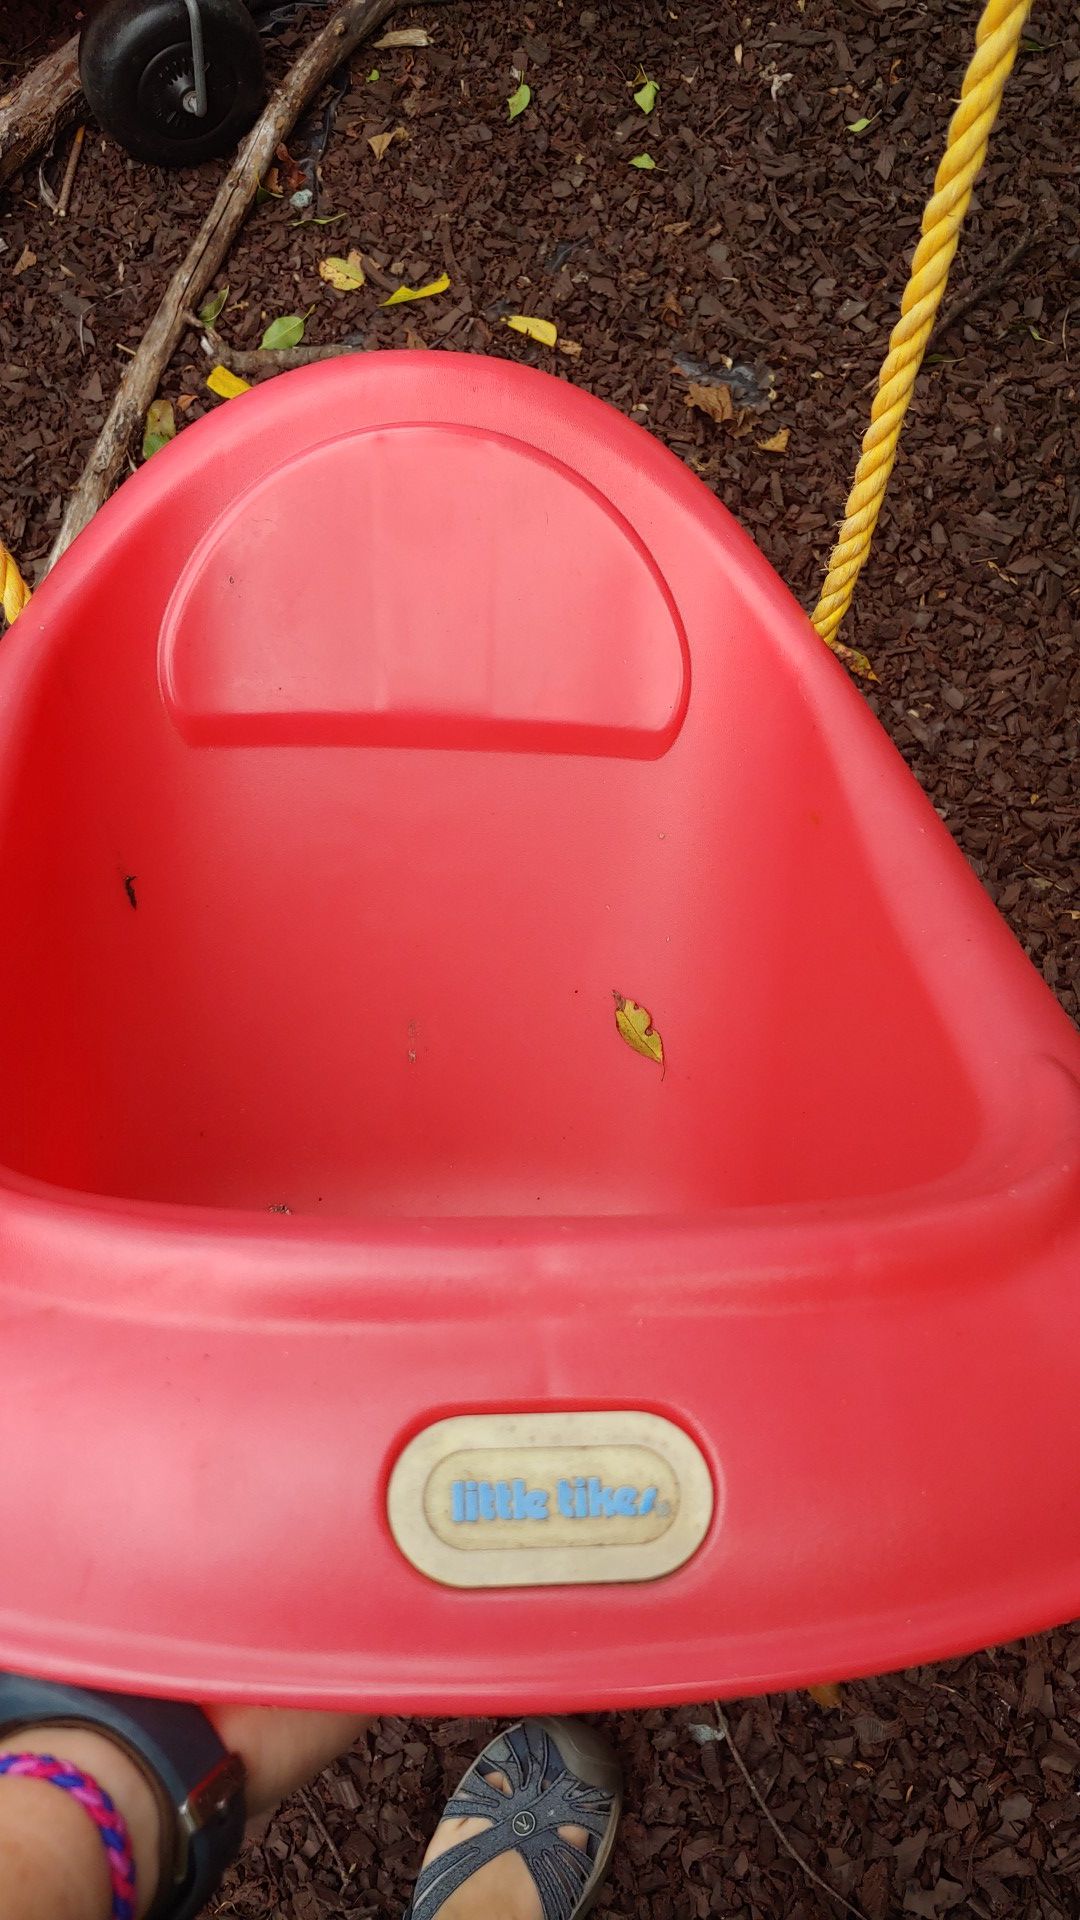 Little Tikes infant swing with buckles